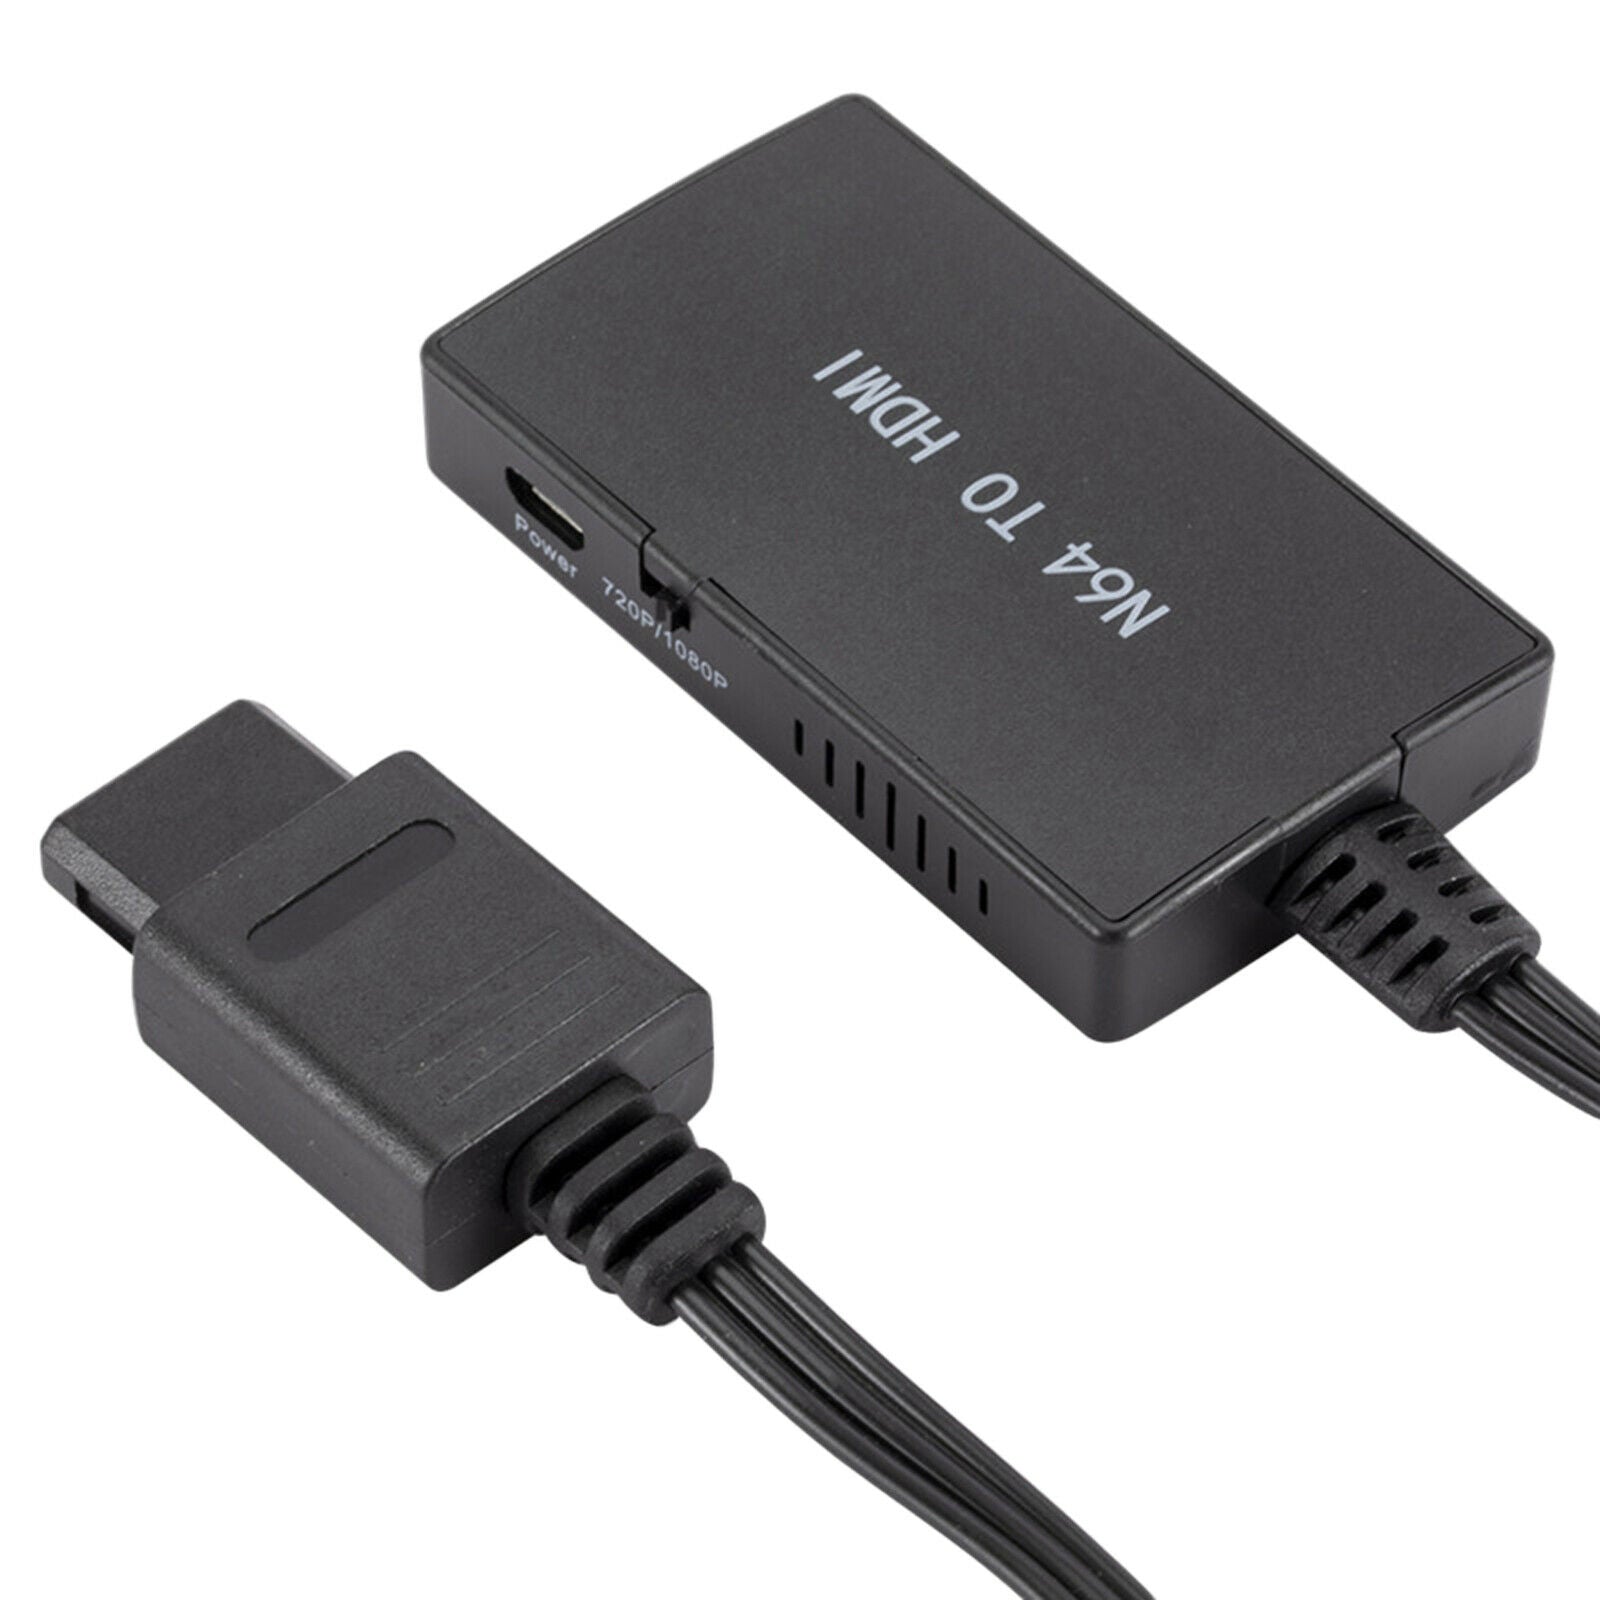 1 Set N64 To HDMI Converter Adapter Plug and Play Tools for N64 Consoles